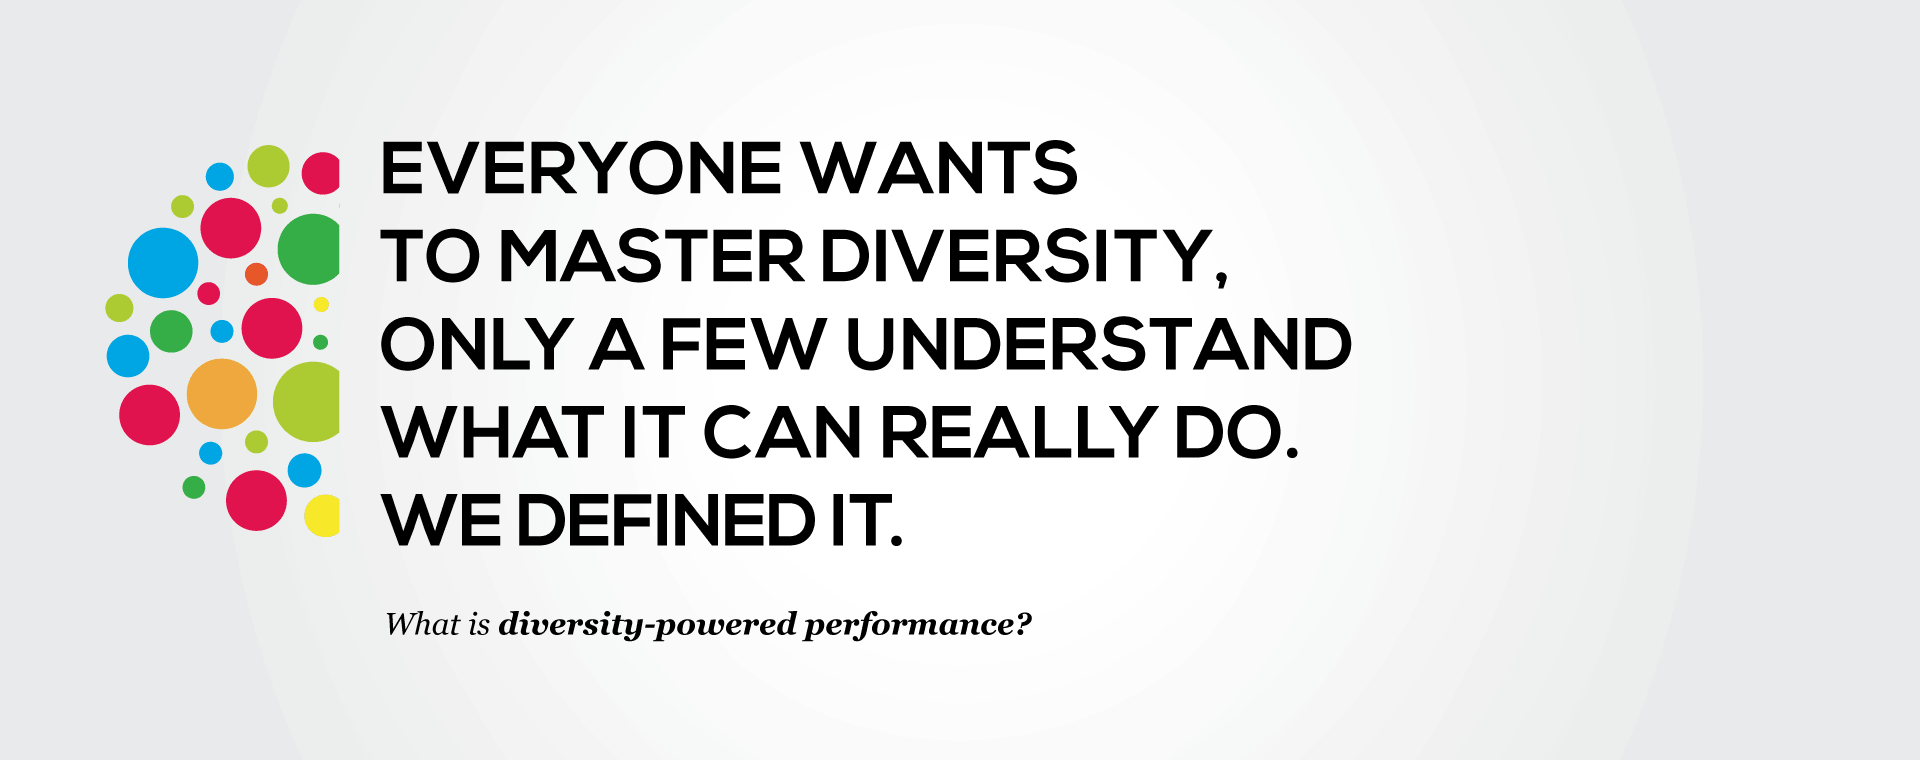 Carousel image 2: Everyone wants to manage diversity, only a few understand what it can really do. We defined it. See our definition of diversity.